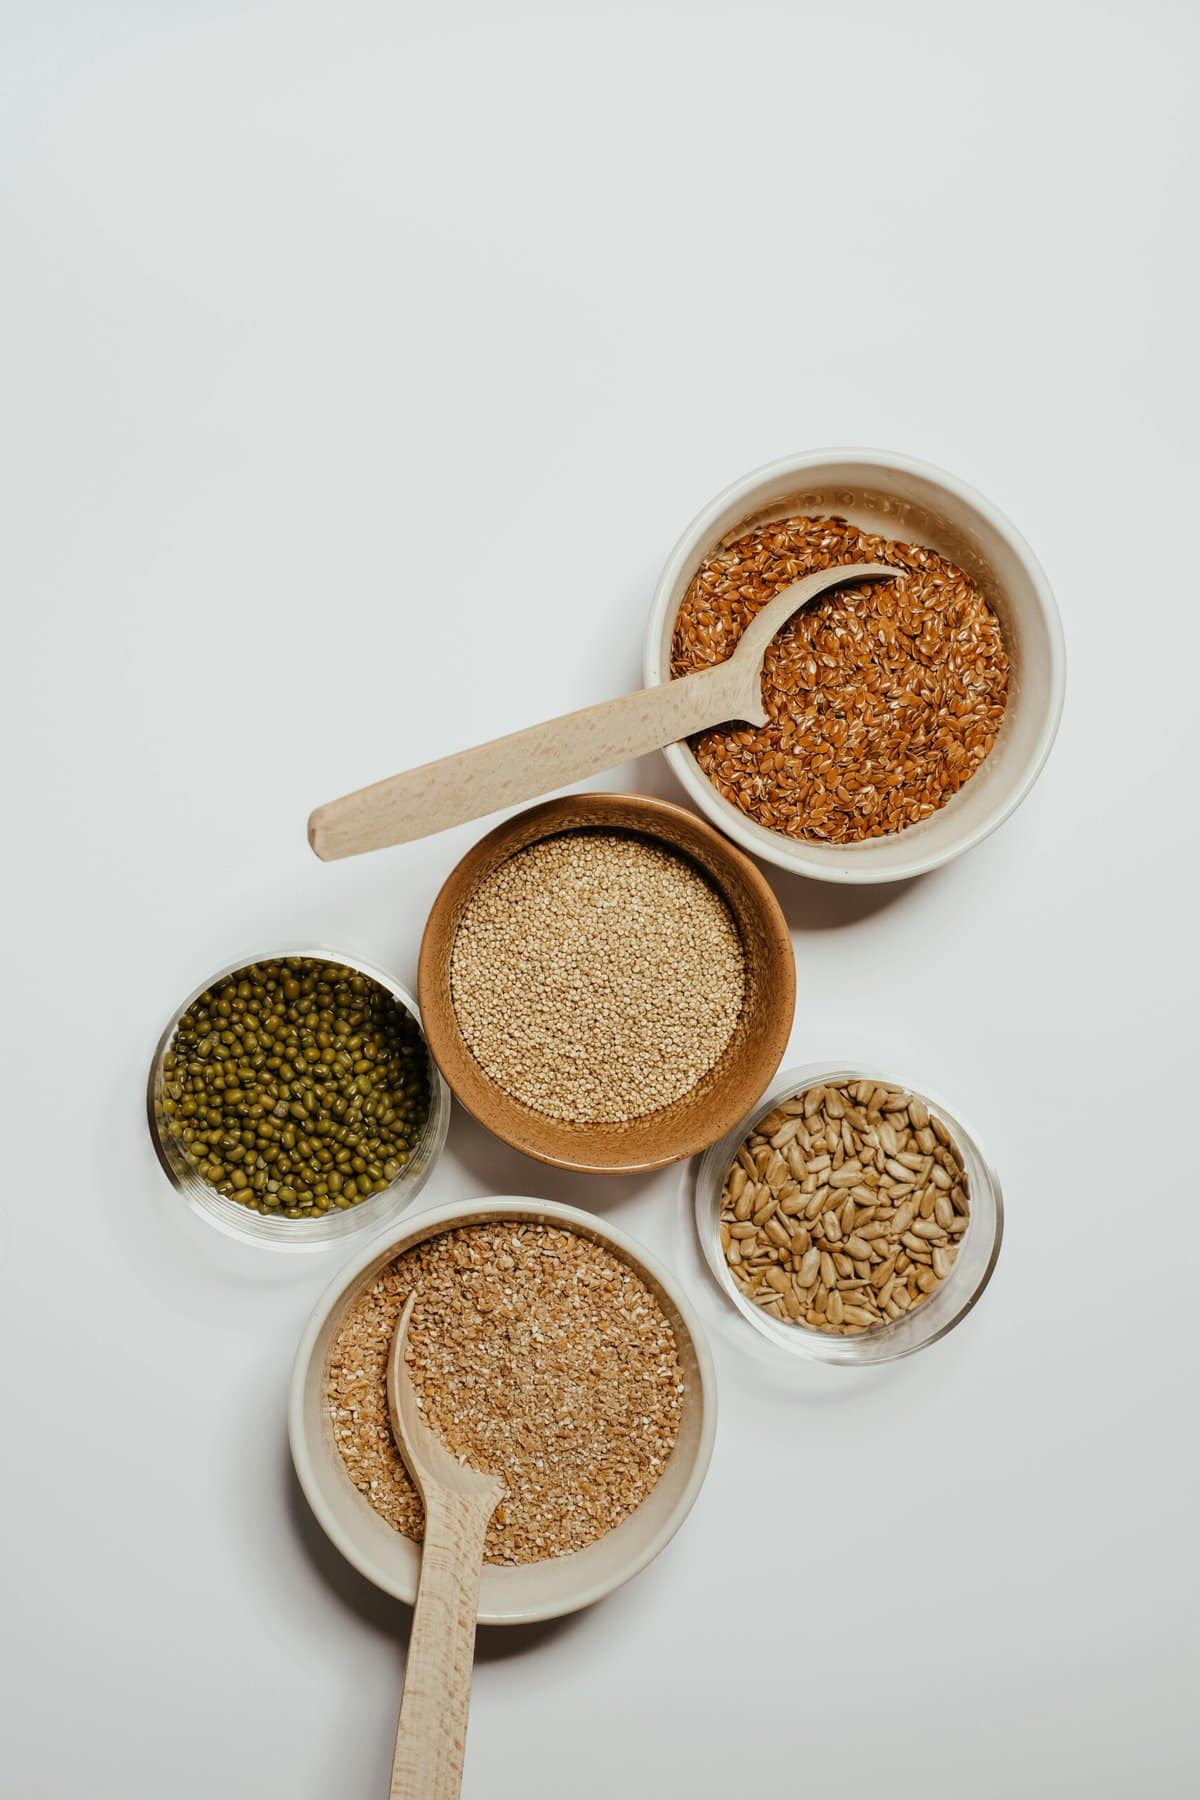 Bowls of dry grains.